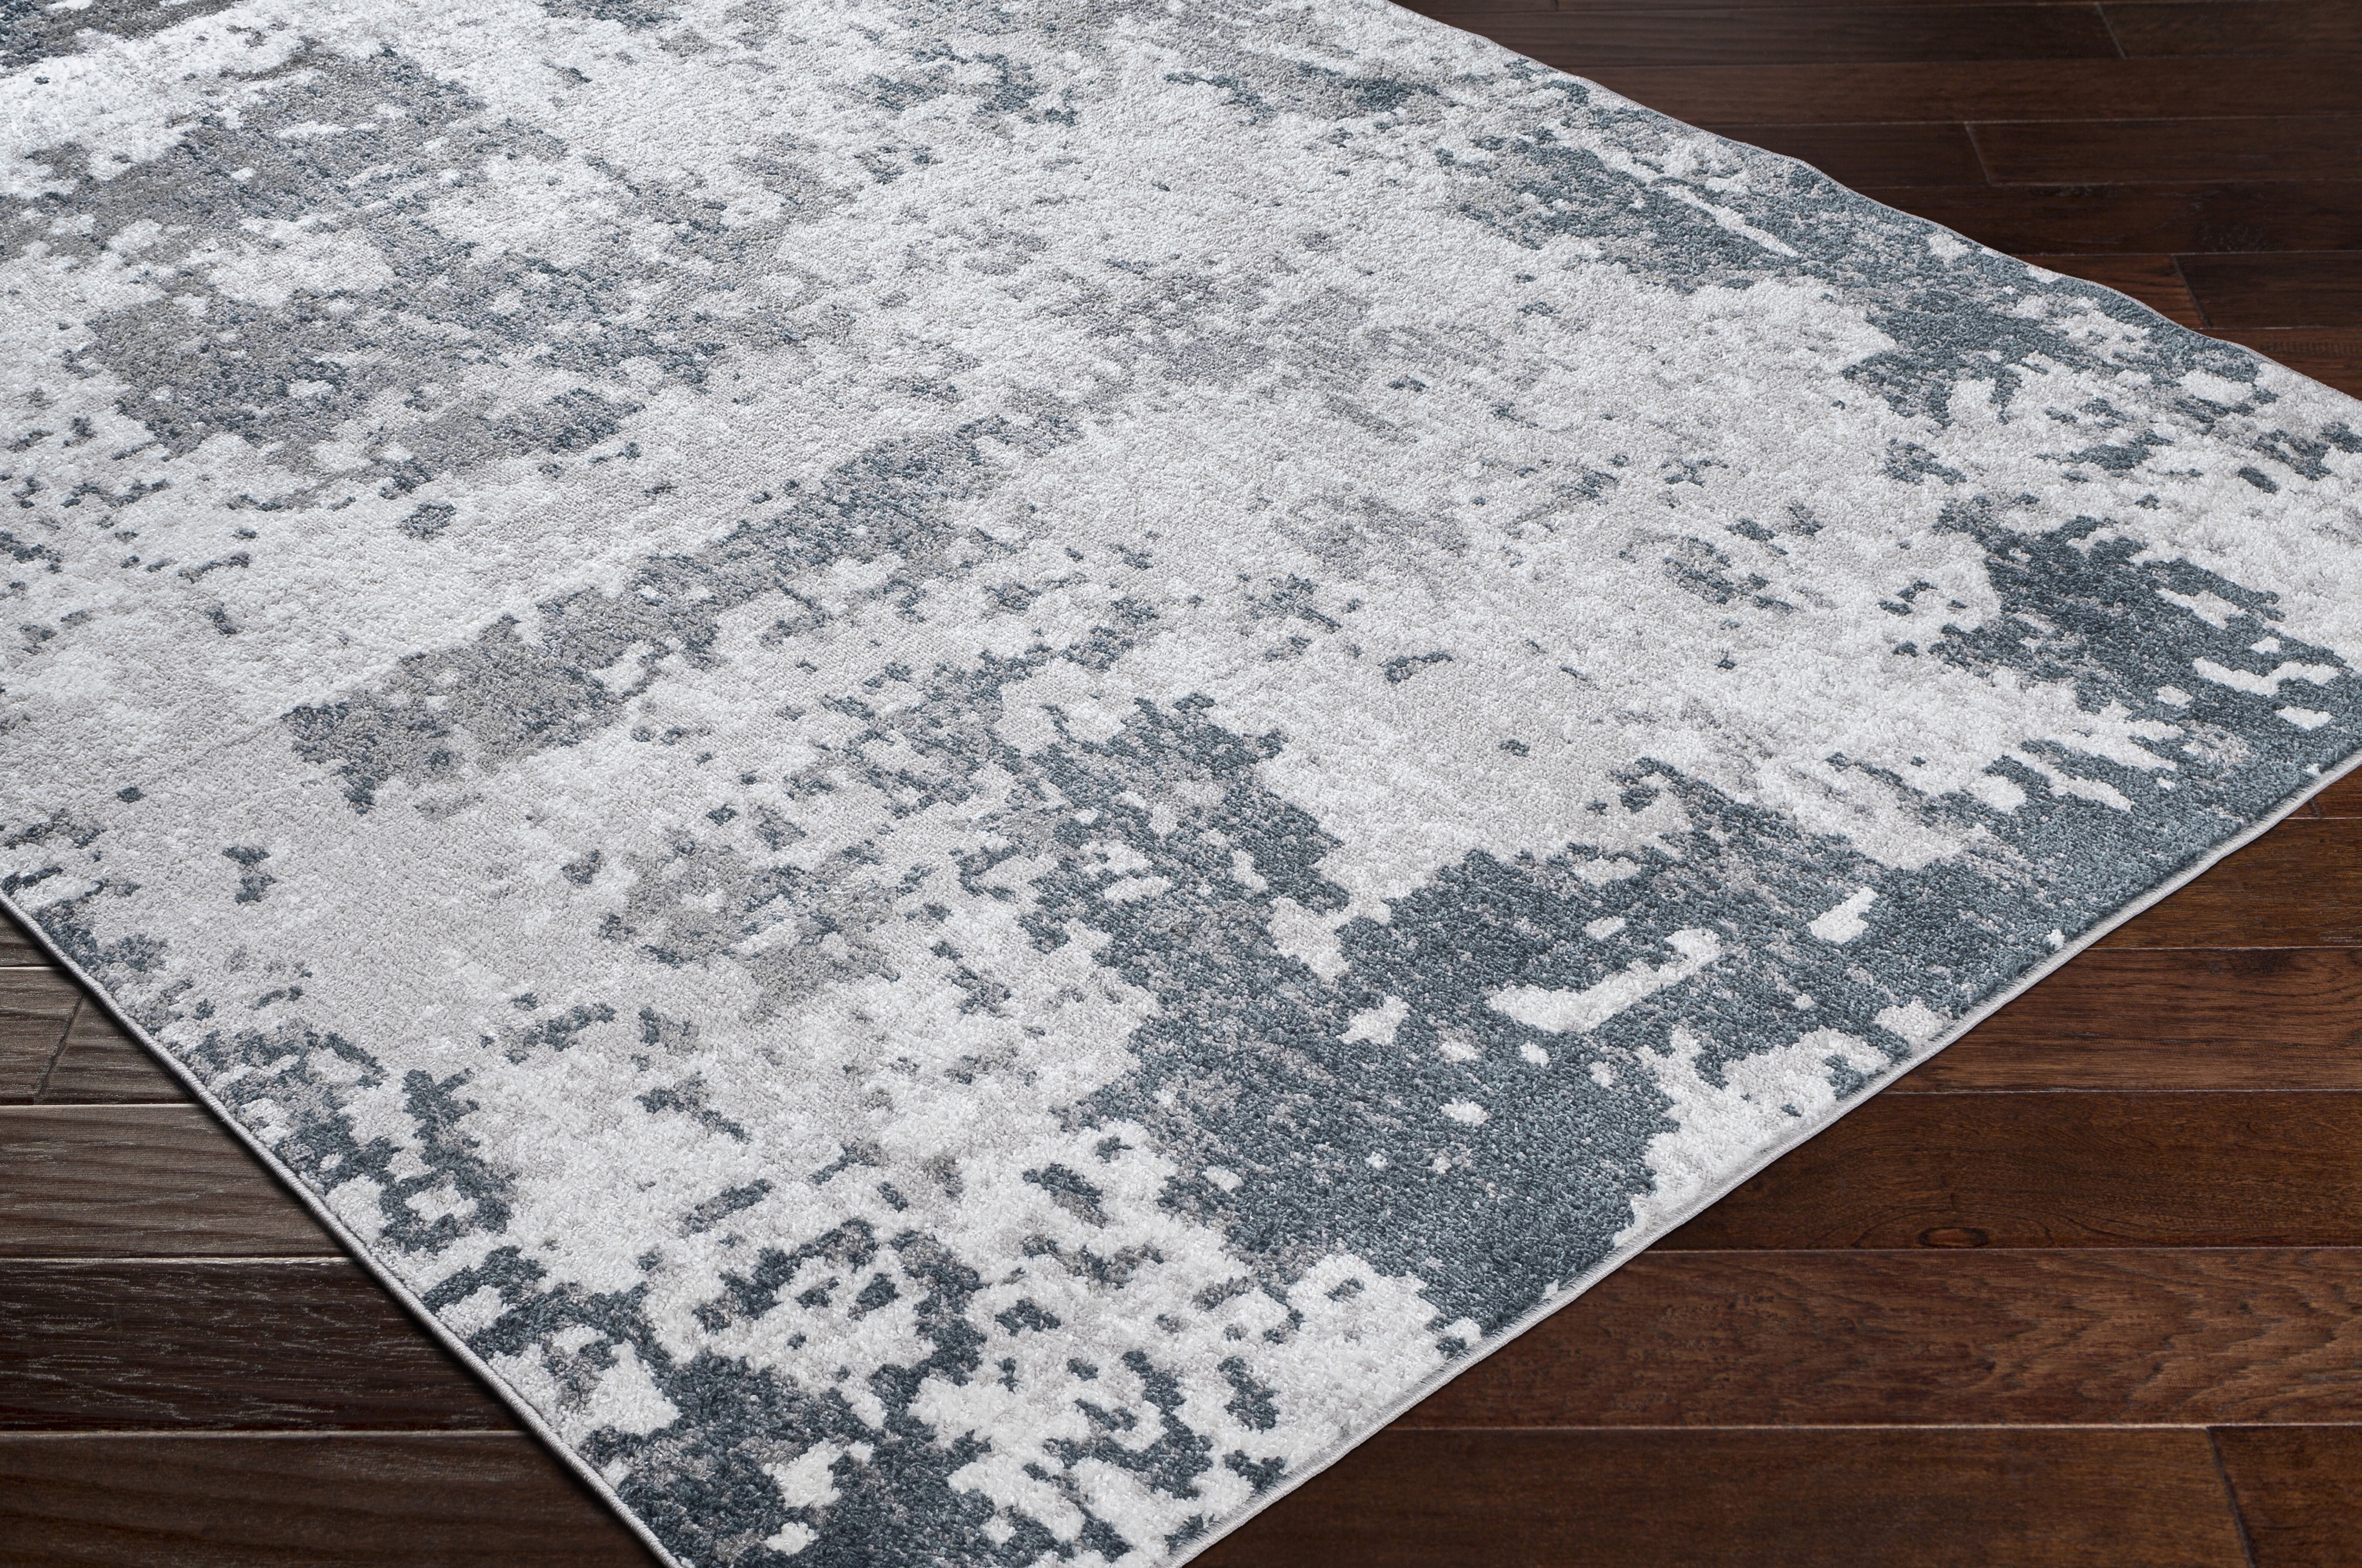 Andalus Rug, 7'9" x 9'6" - Image 4